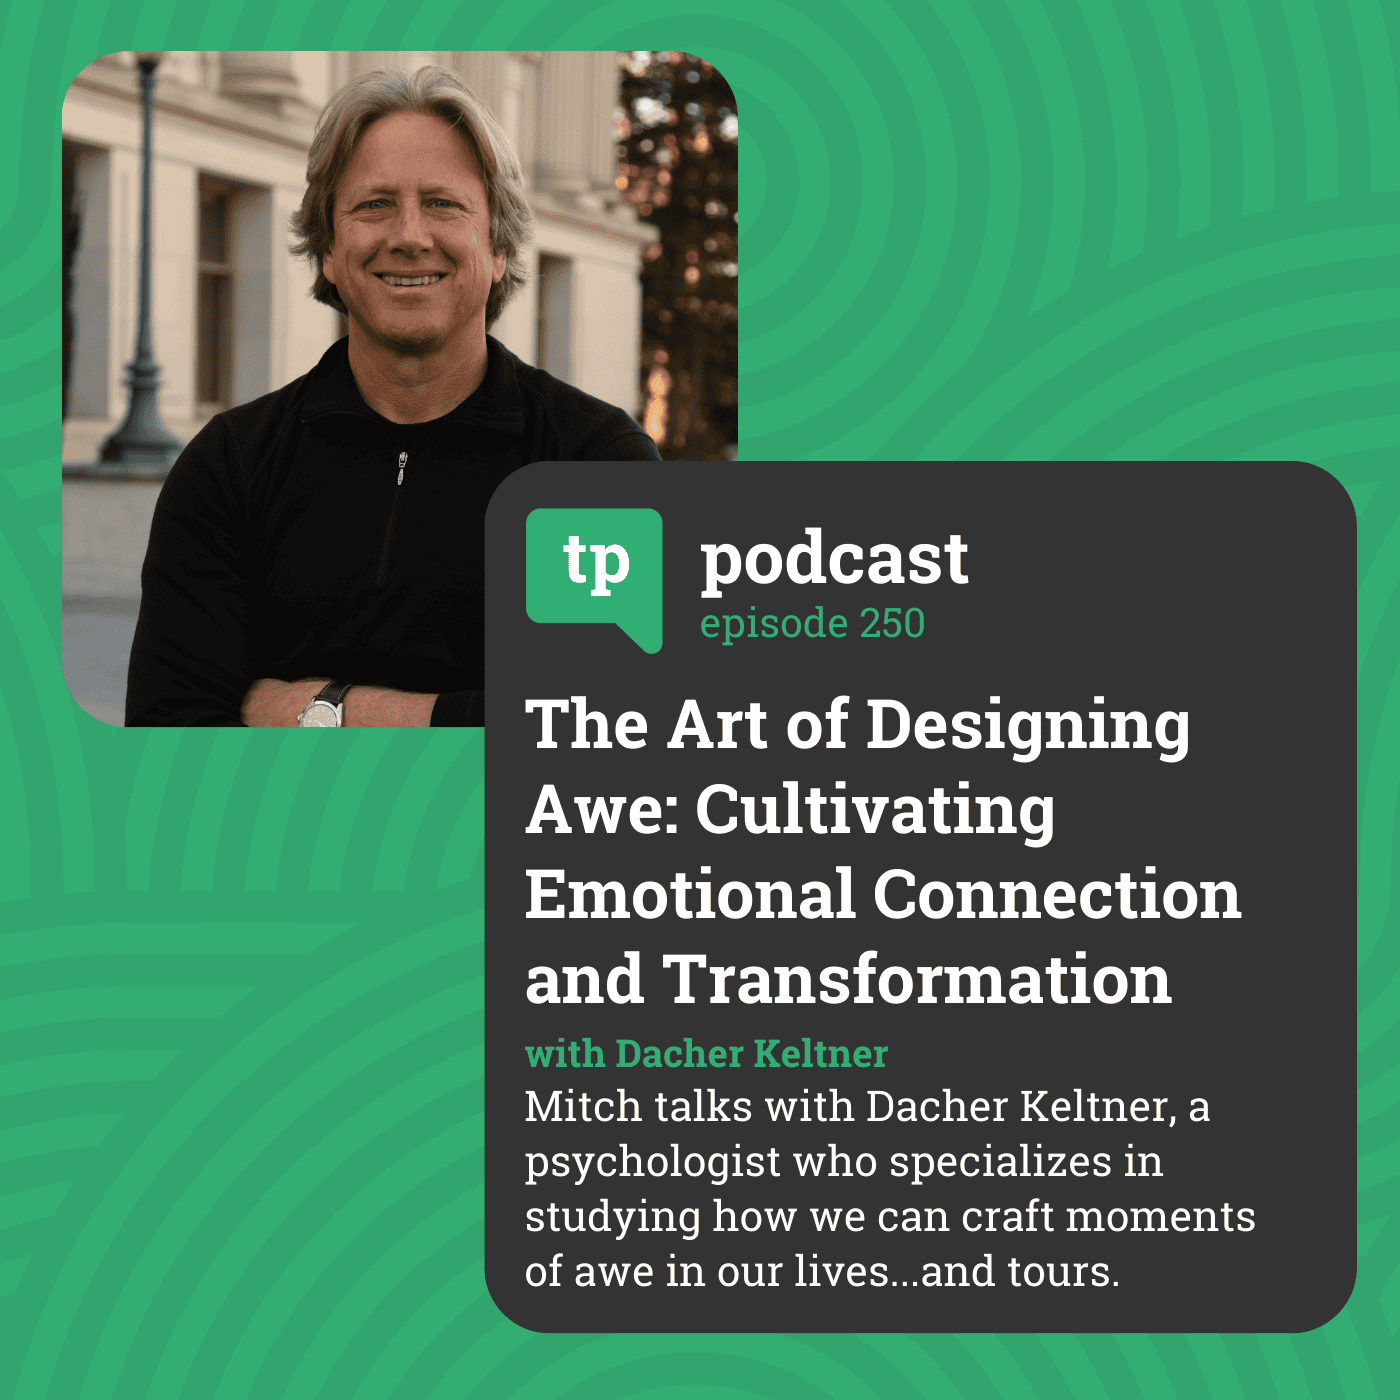 The Art of Crafting ’Awe’: The Psychology of making lasting tour memories (w/ Psychologist Dacher Keltner)